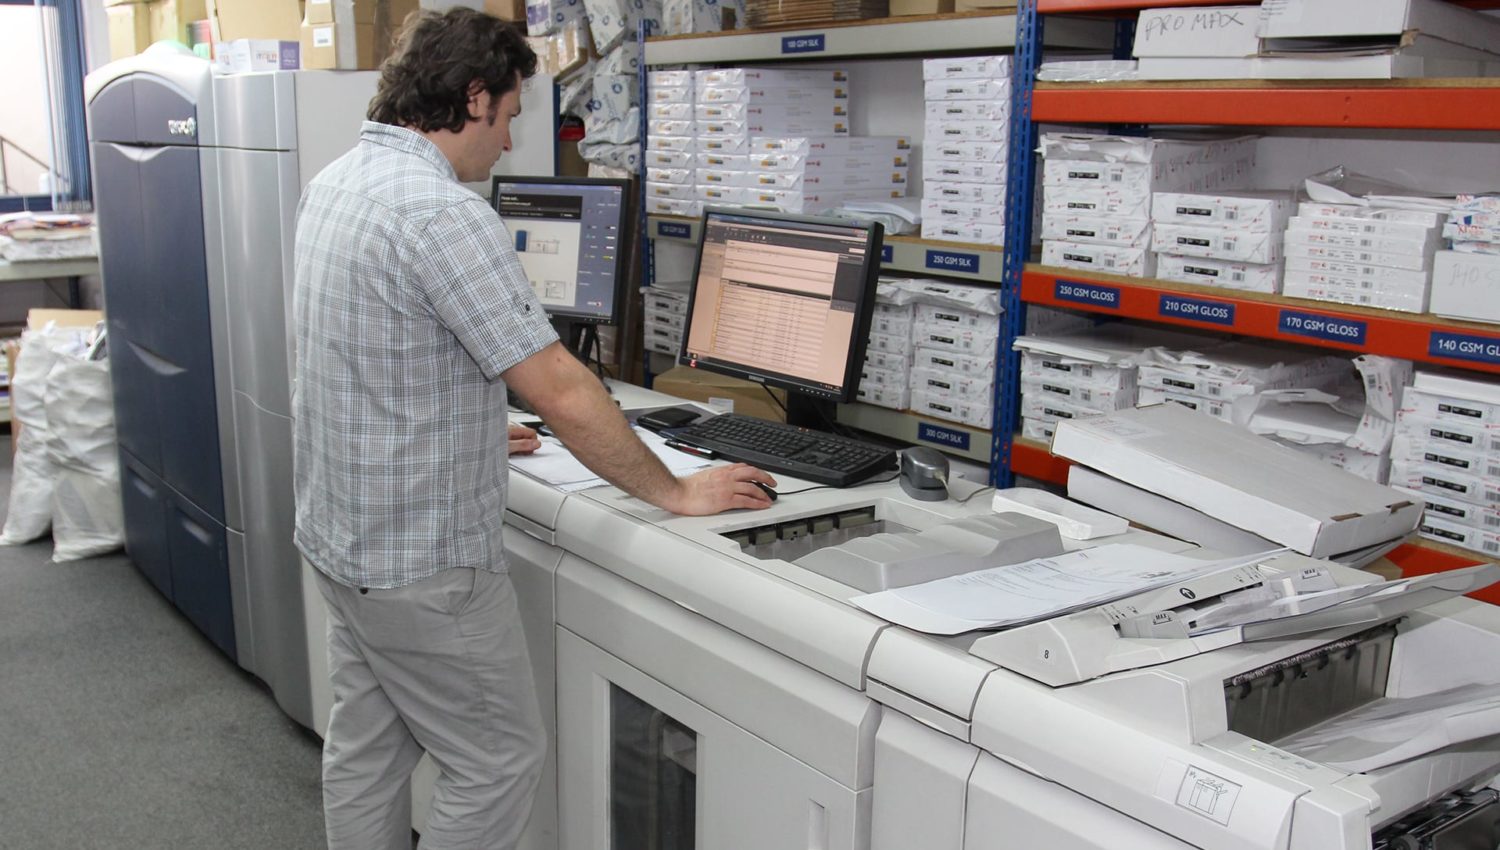 Top 5 questions about digital printing answered